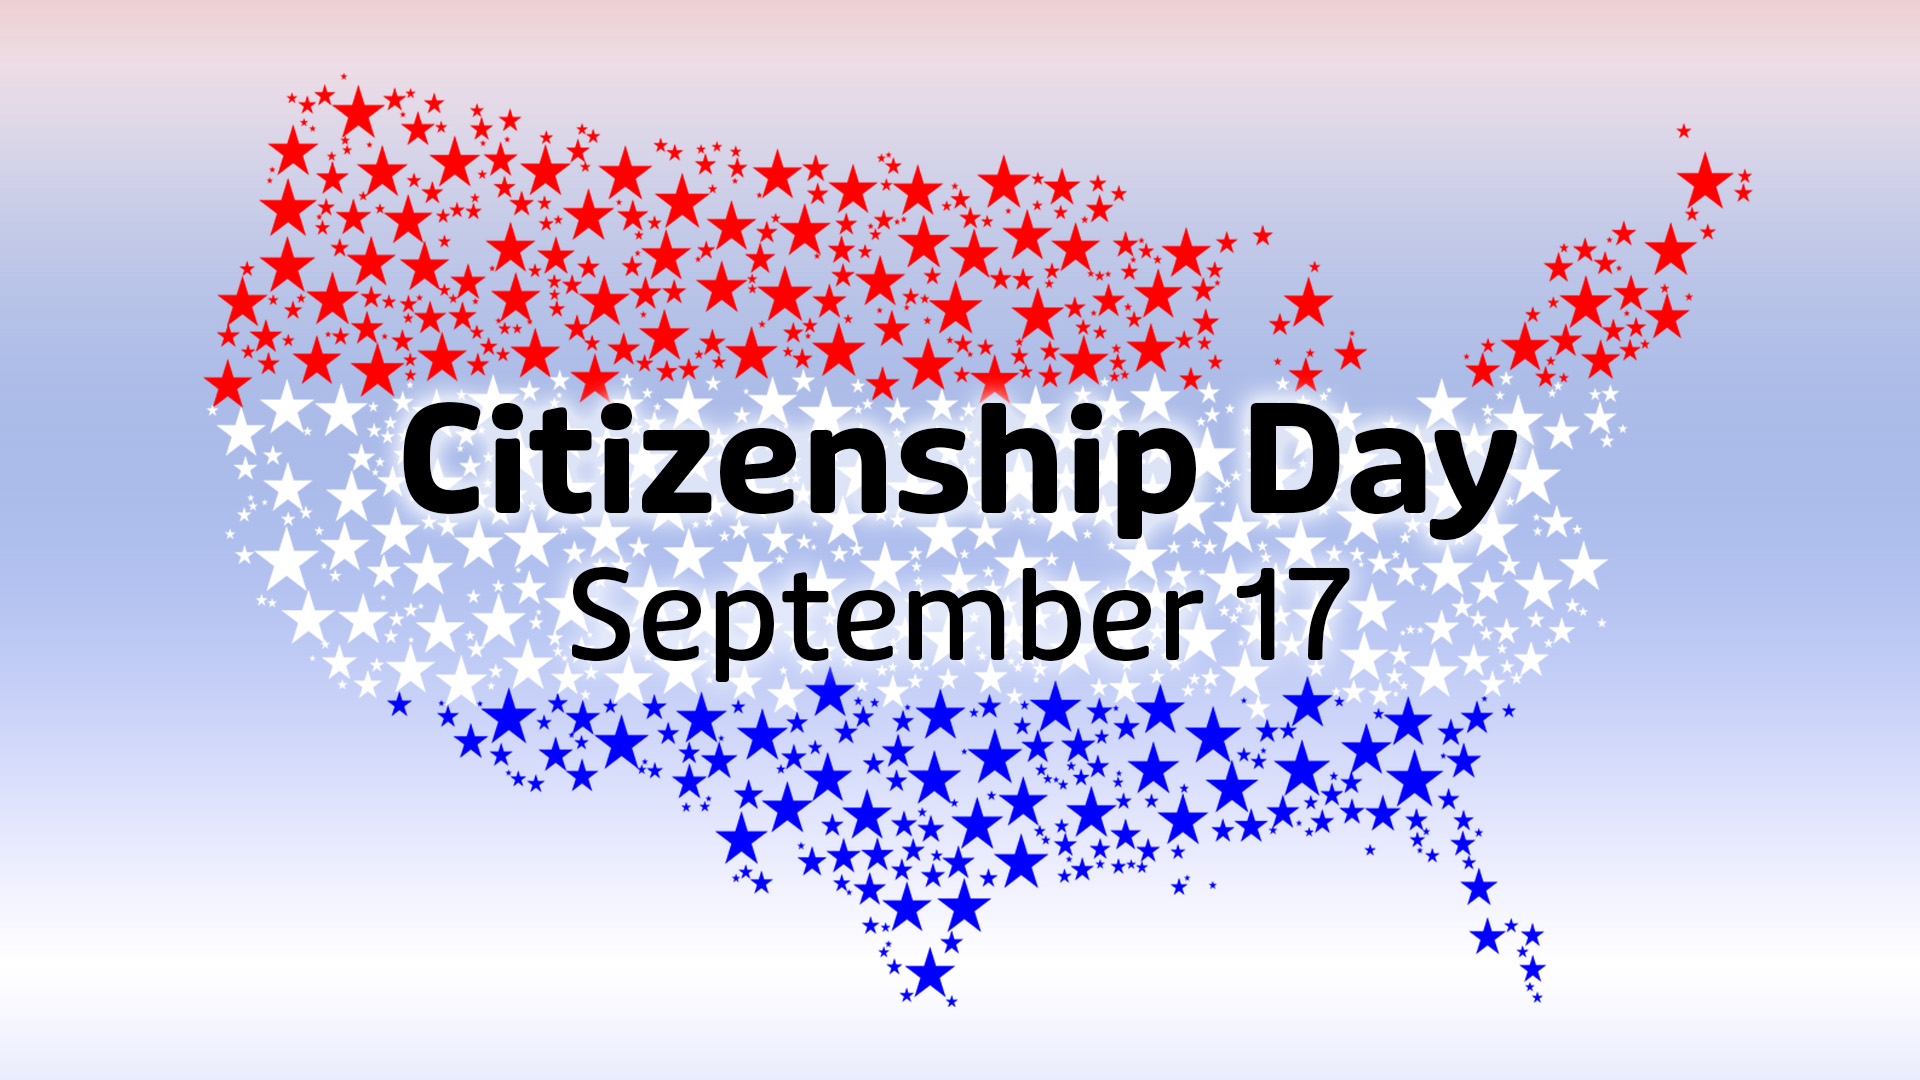 Red, blue, and white gradient background. The United States of American area land map made out of red, white, and blue stars fill the image. In the center, black sans serif font text reads Citizenship Day September 17.